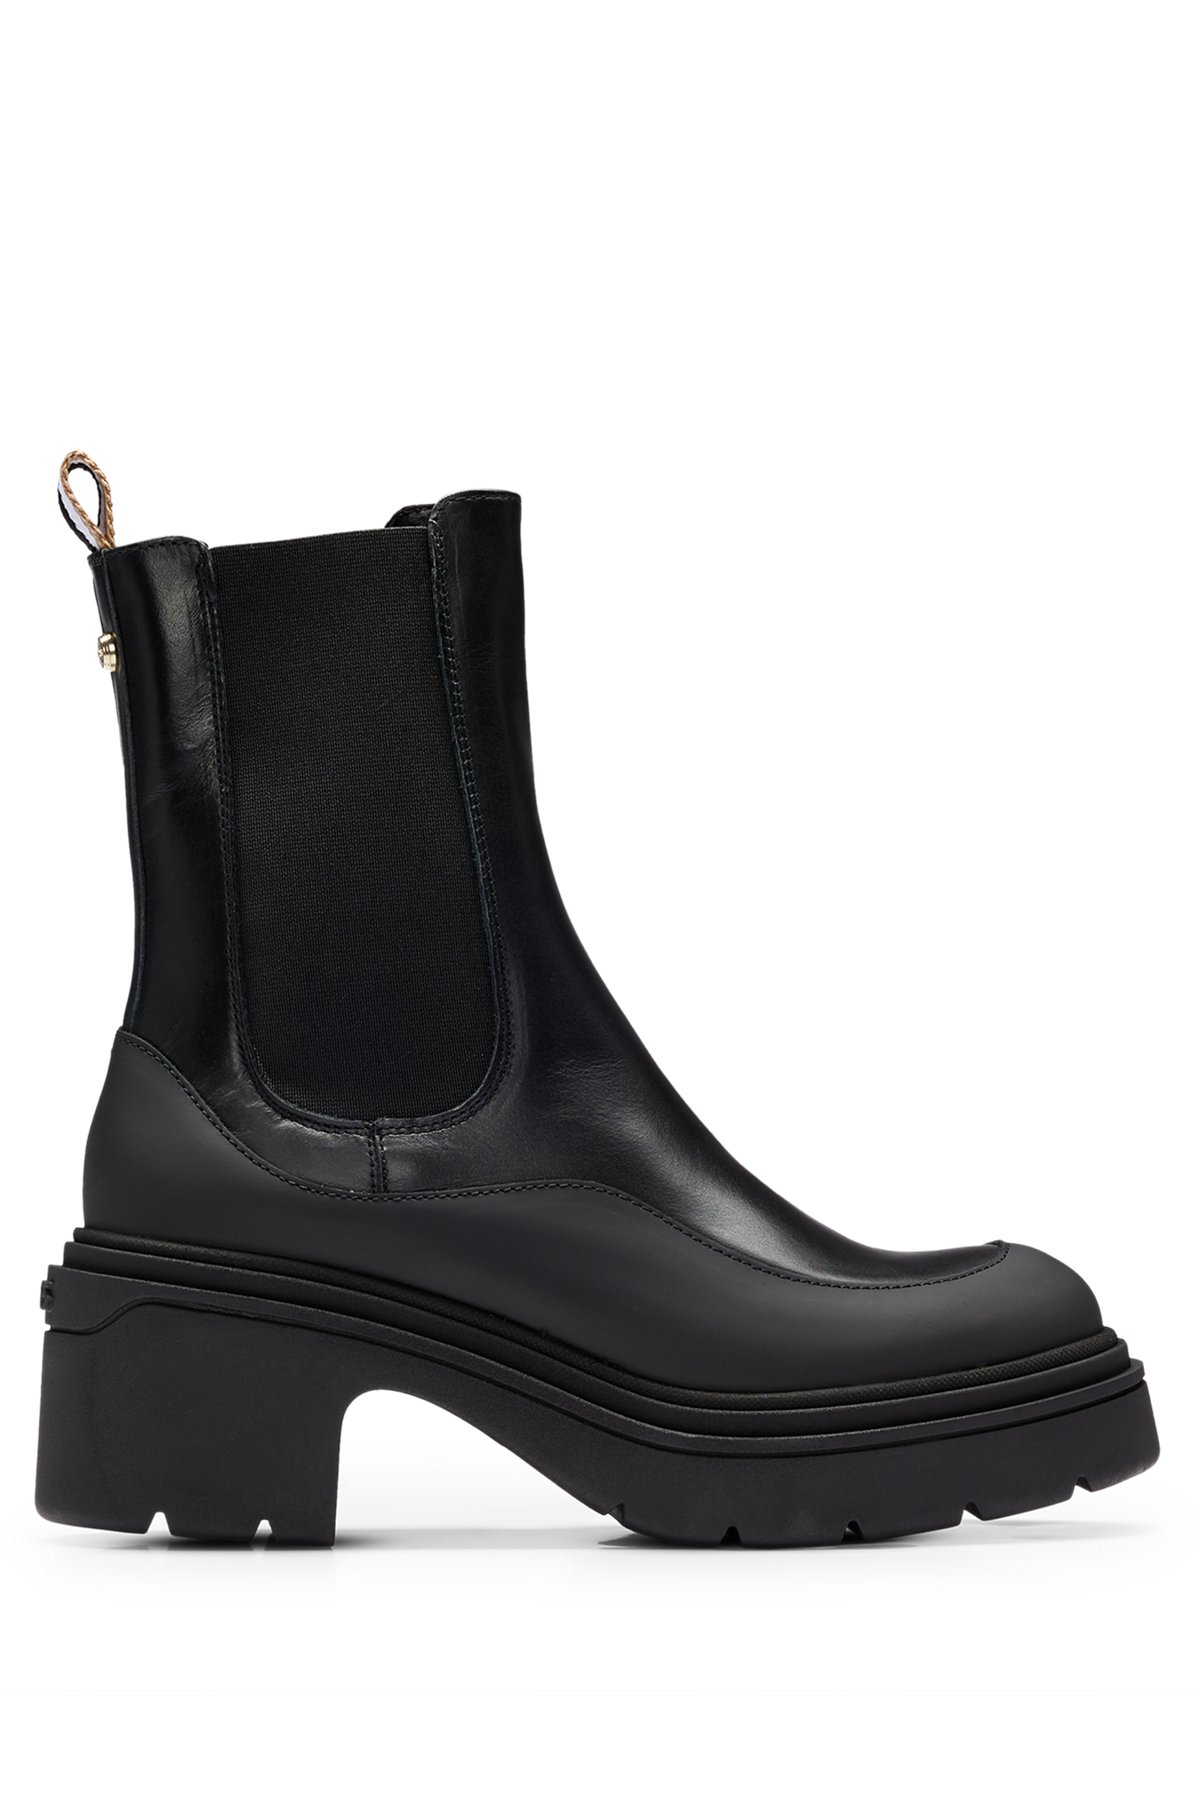 Chelsea boots in smooth leather with chunky sole, Black